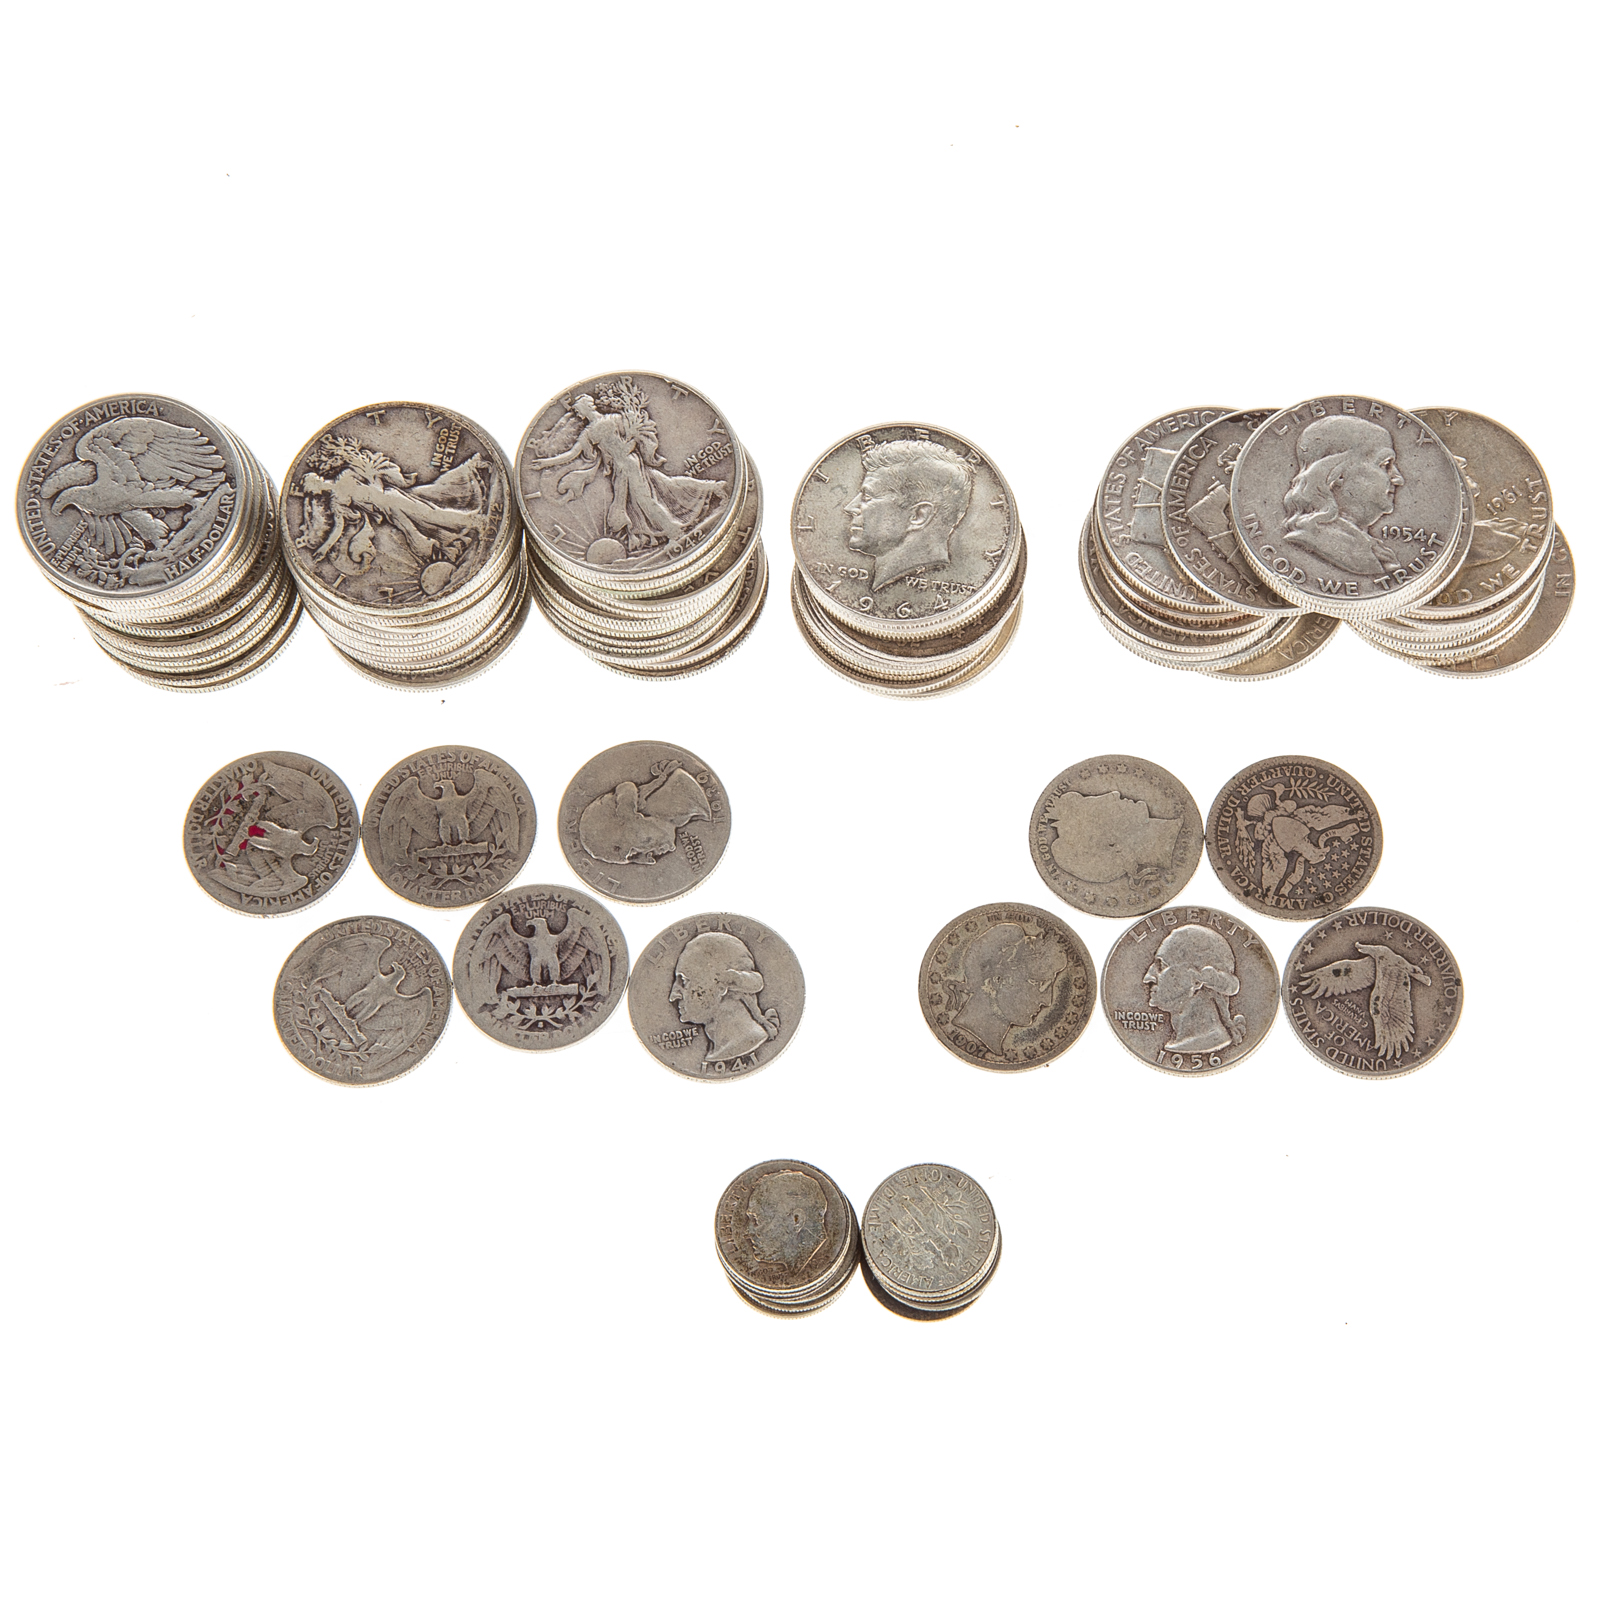  43 35 FACE IN US SILVER COINS 334a45